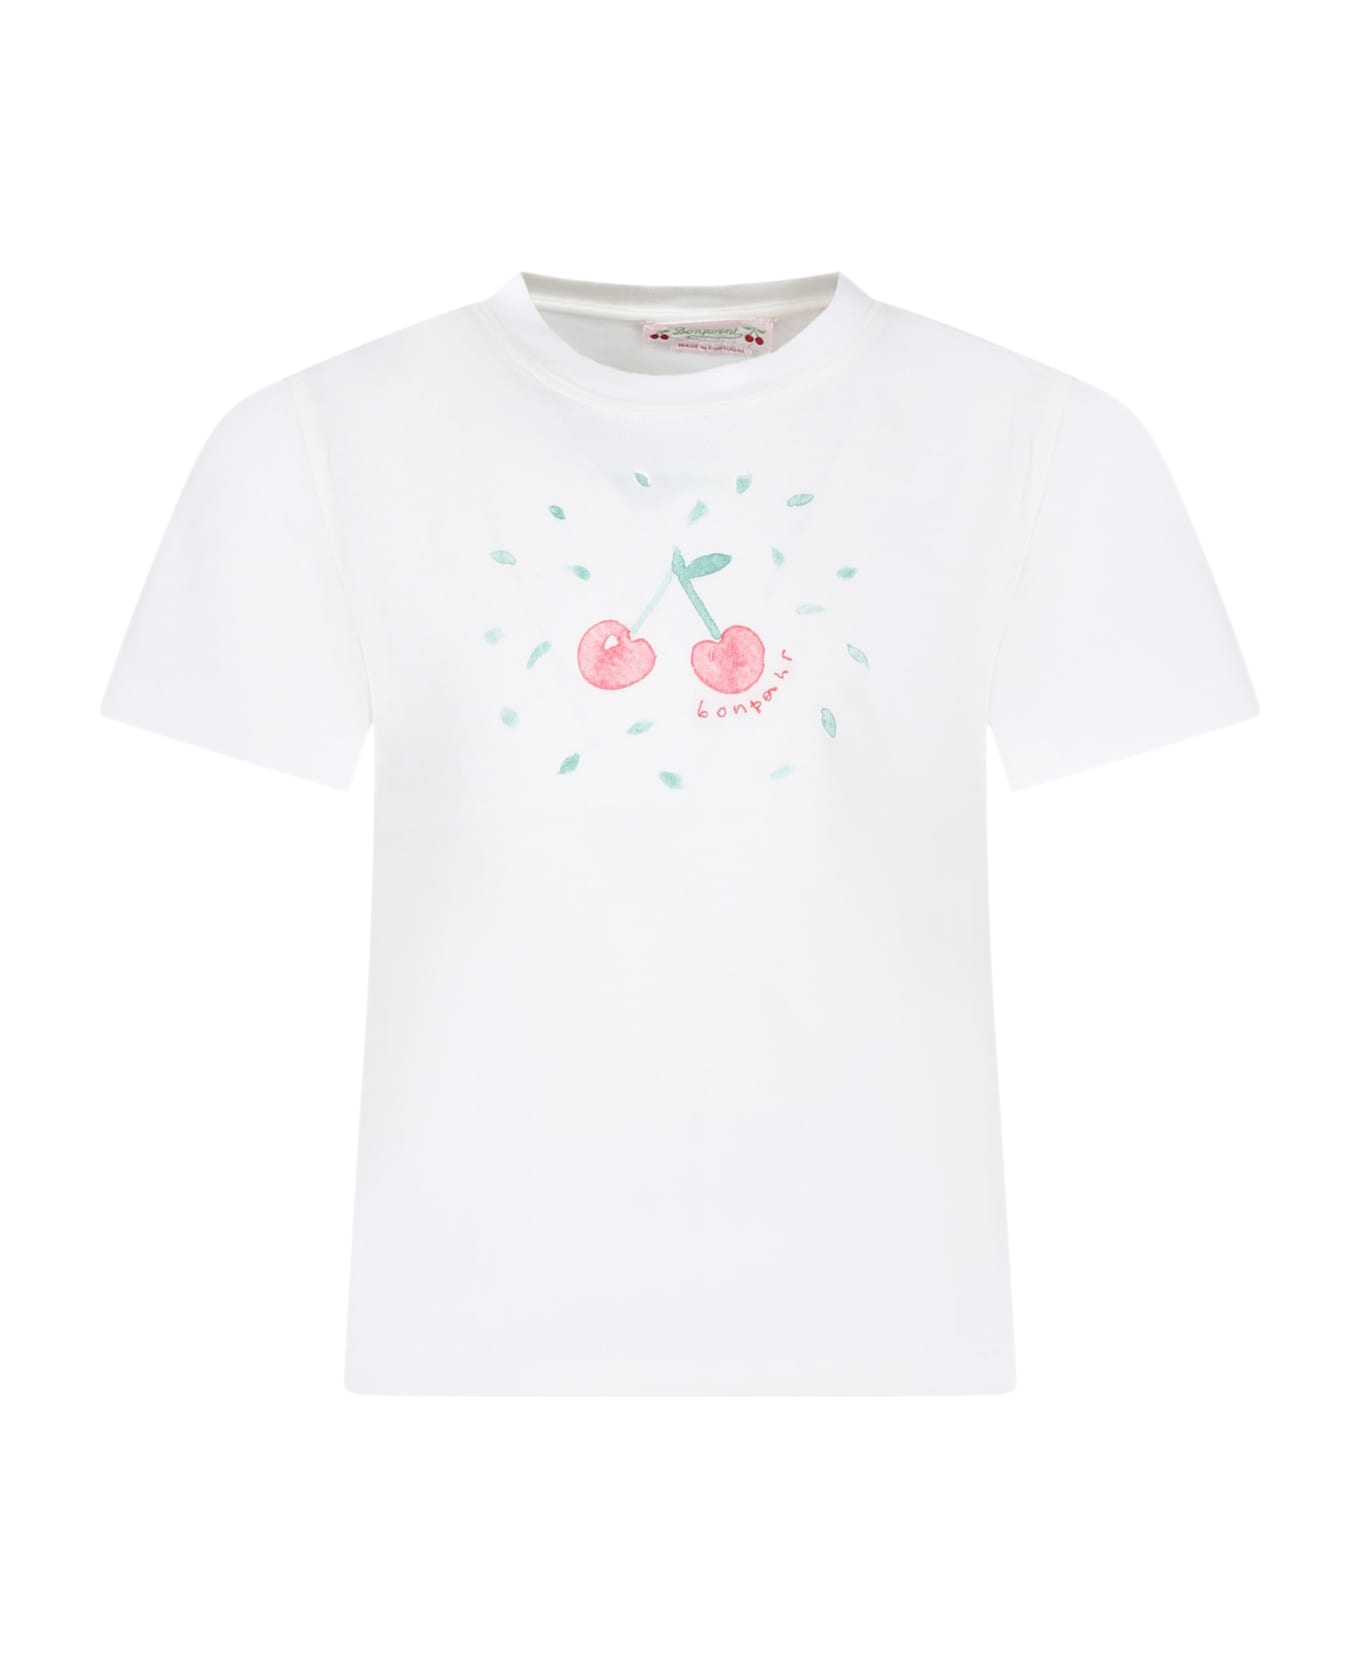 Bonpoint White T-shirt For Girl With Iconic Cherries - White